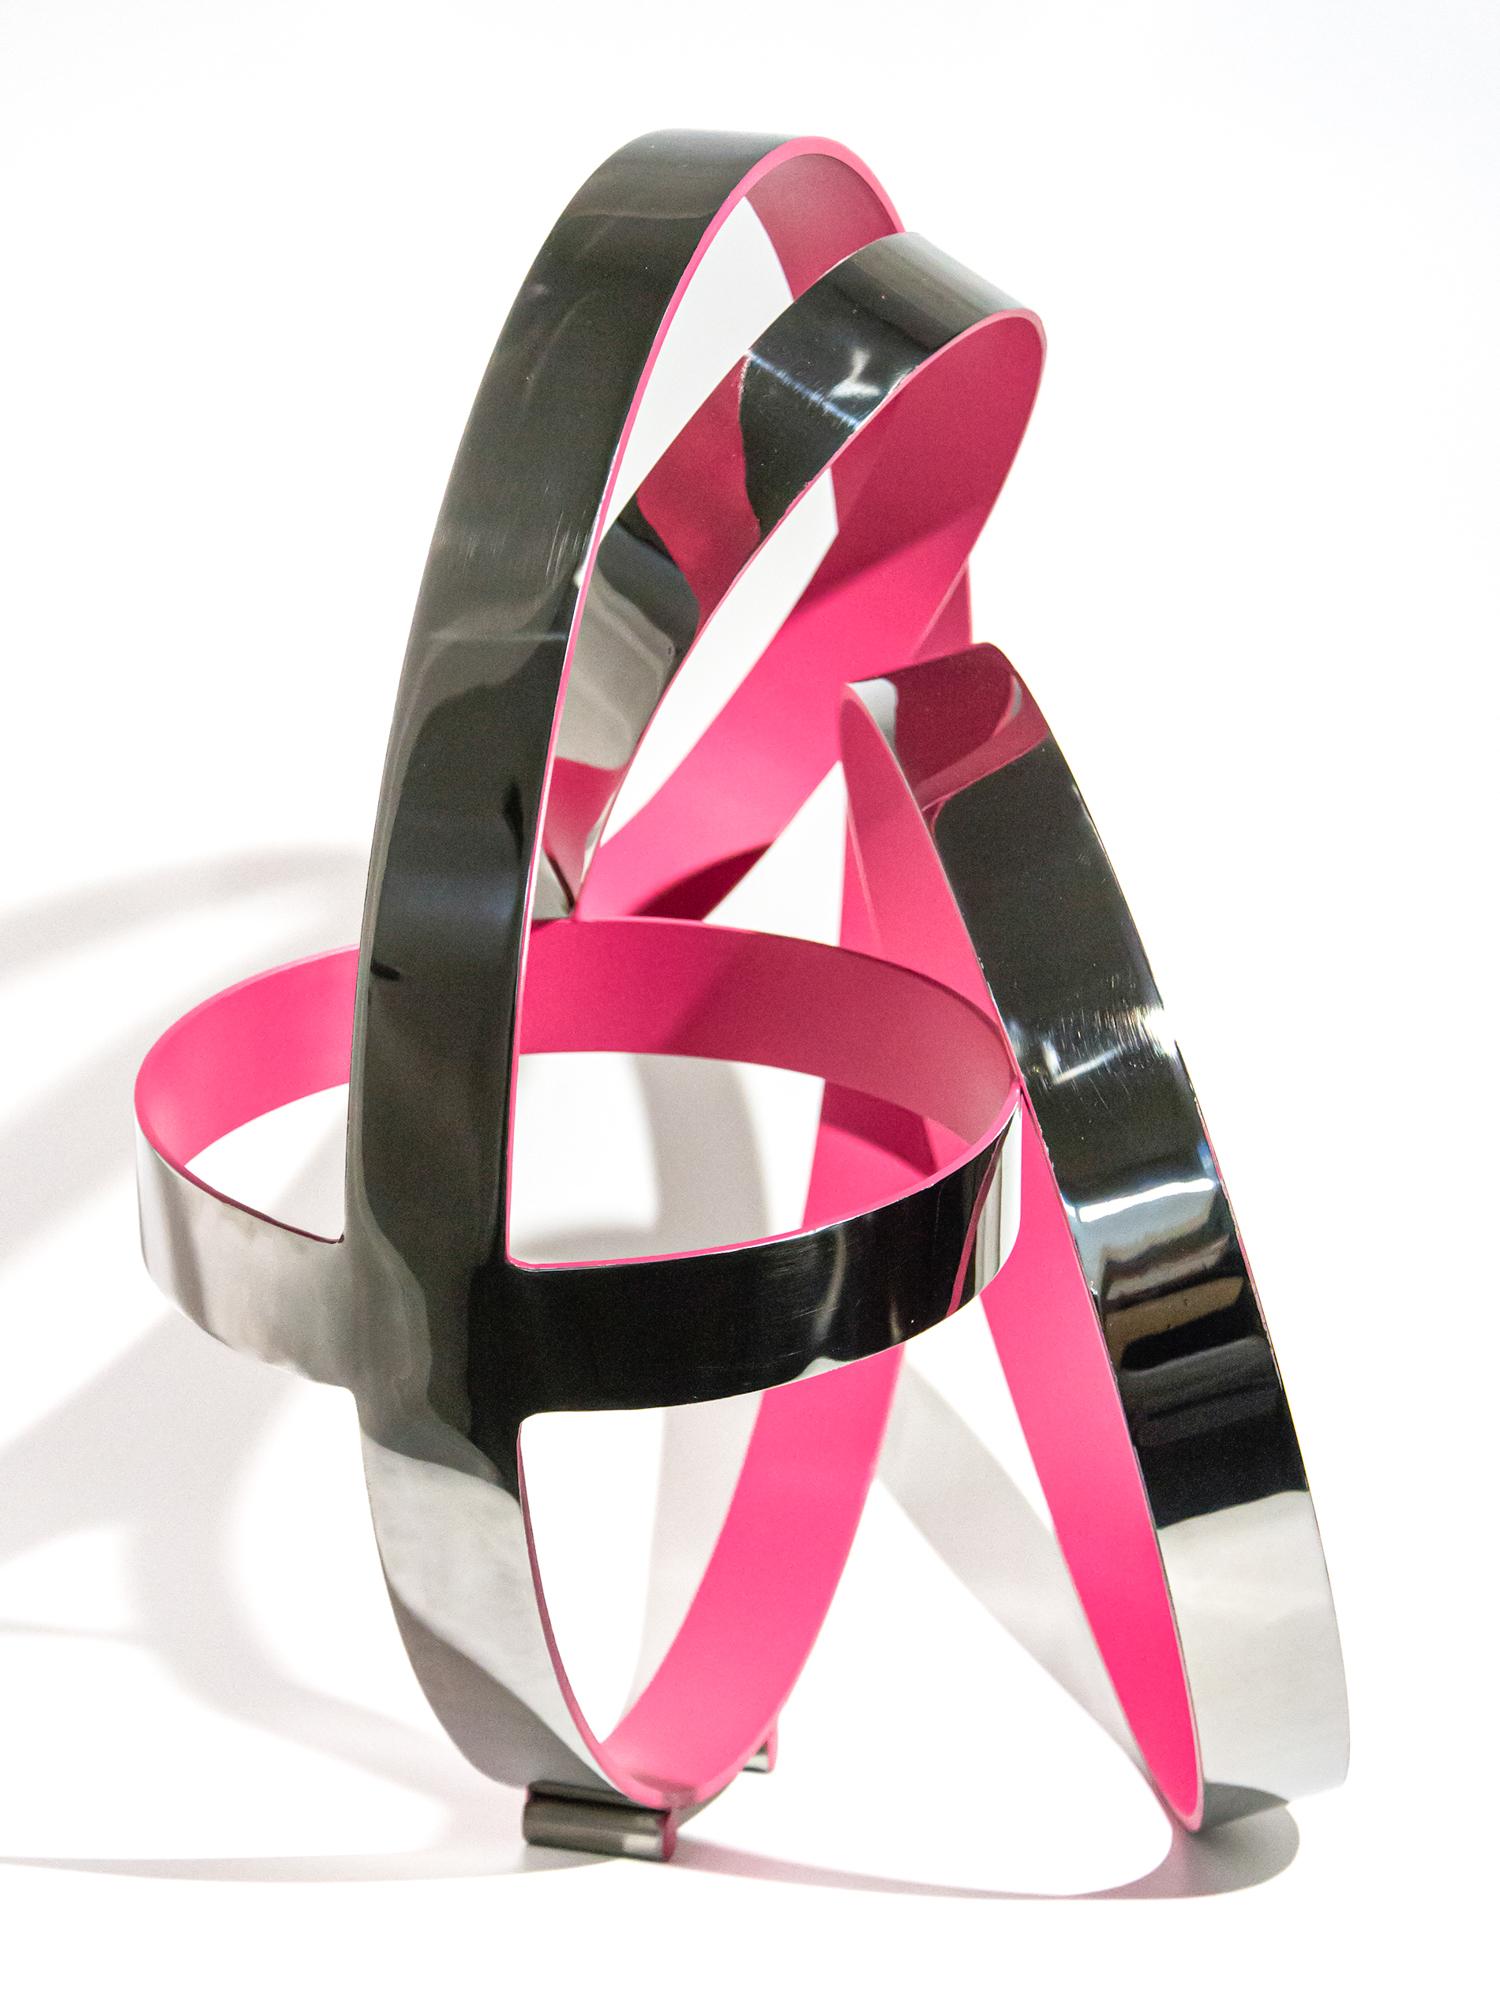 Hot pink pops from the interior of four intersecting polished stainless-steel rings in this contemporary tabletop sculpture by Quebec artist Philippe Pallafray. His elegant abstract work is designed to represent the duality of nature and the